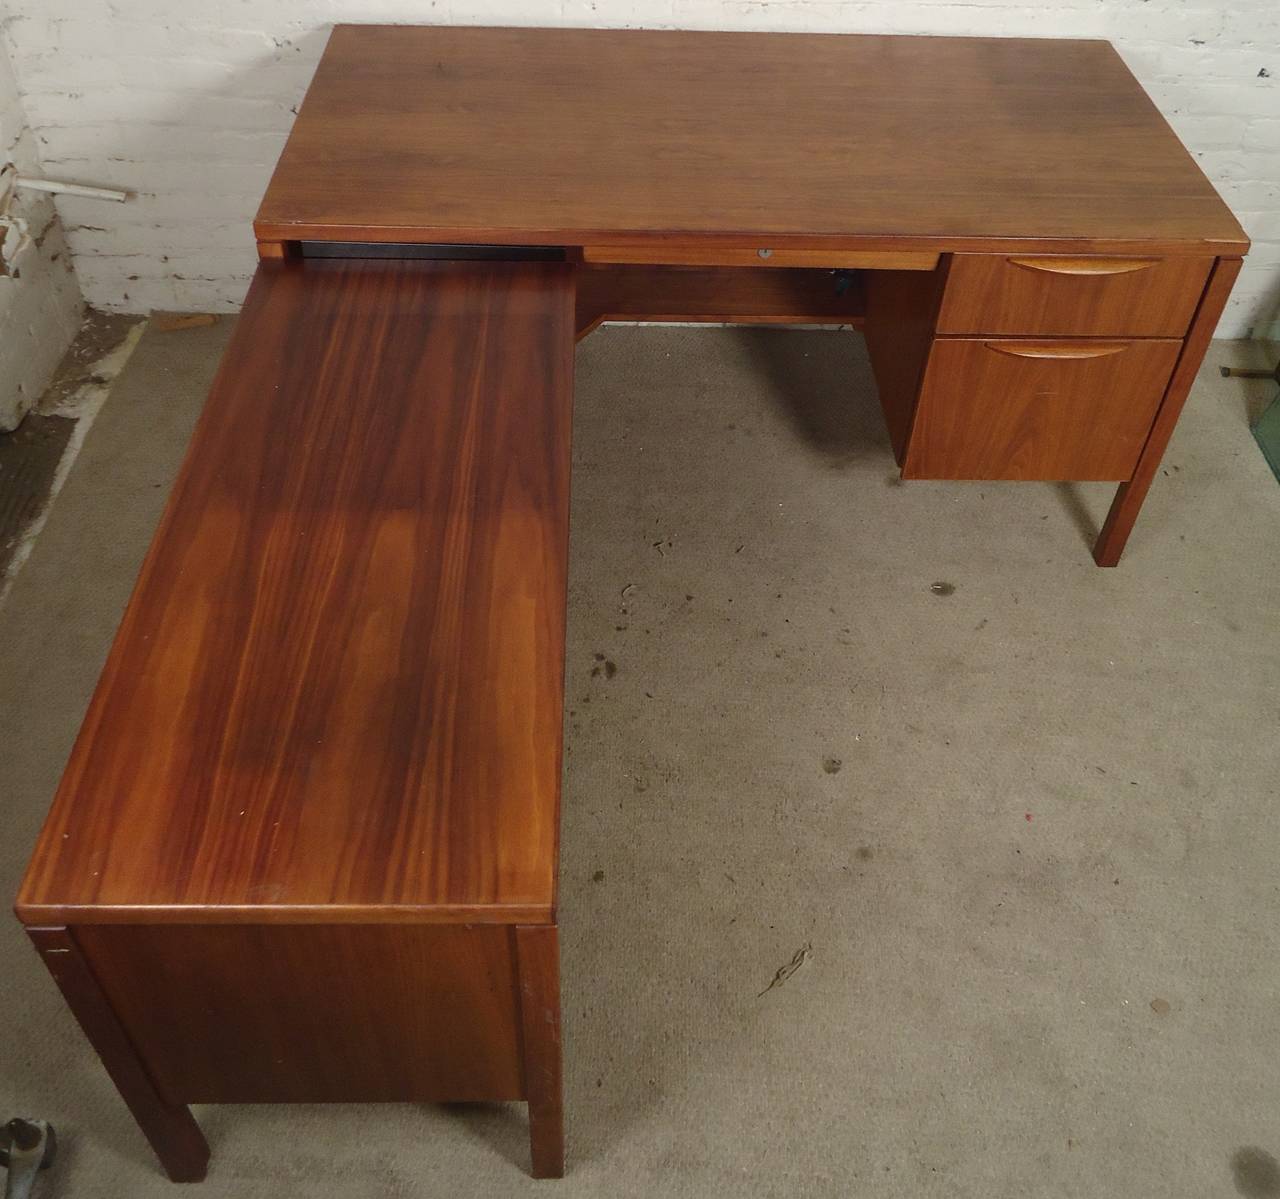 Striking L-shaped desk by Jens Risom with finished back. Walnut grain throughout, multi-size file drawers, sculpted handles.
Desk connects with underside locking mechanism.

(Please confirm item location - NY or NJ - with dealer).